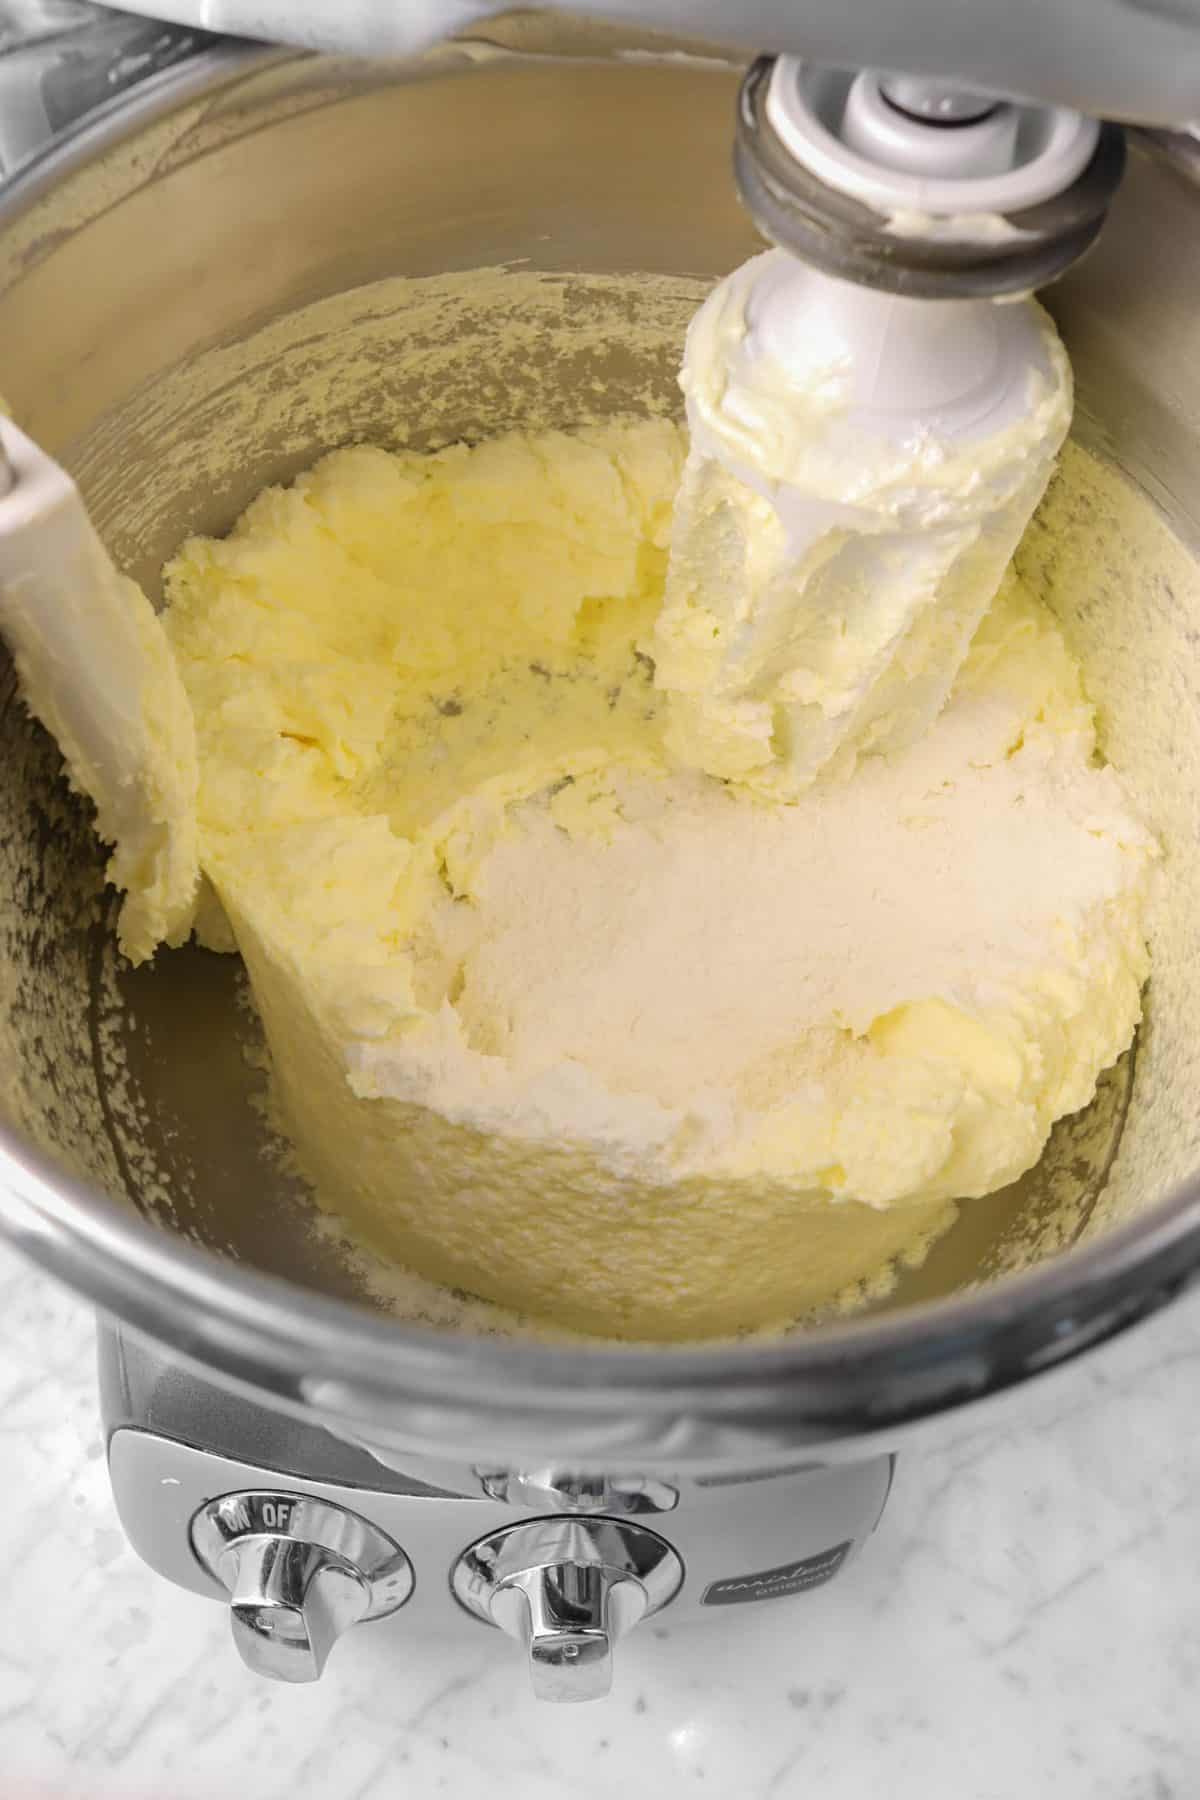 flour added to butter, sugar, and egg mixture